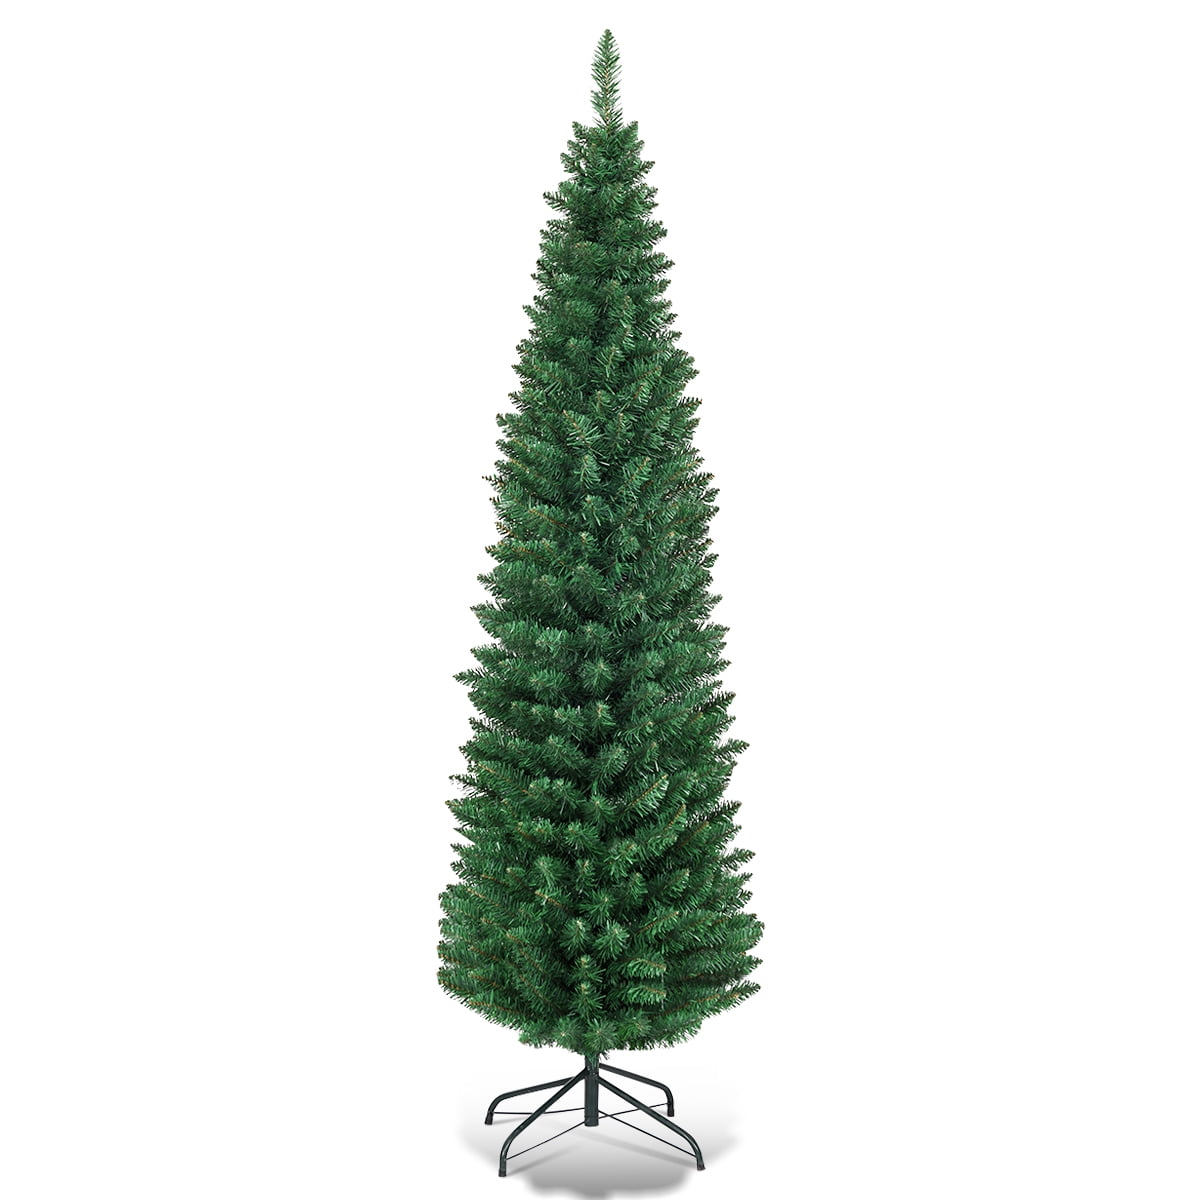 Used Home Heritage Cashmere 5 Ft Artificial Christmas Half Tree w/ LED Lights 